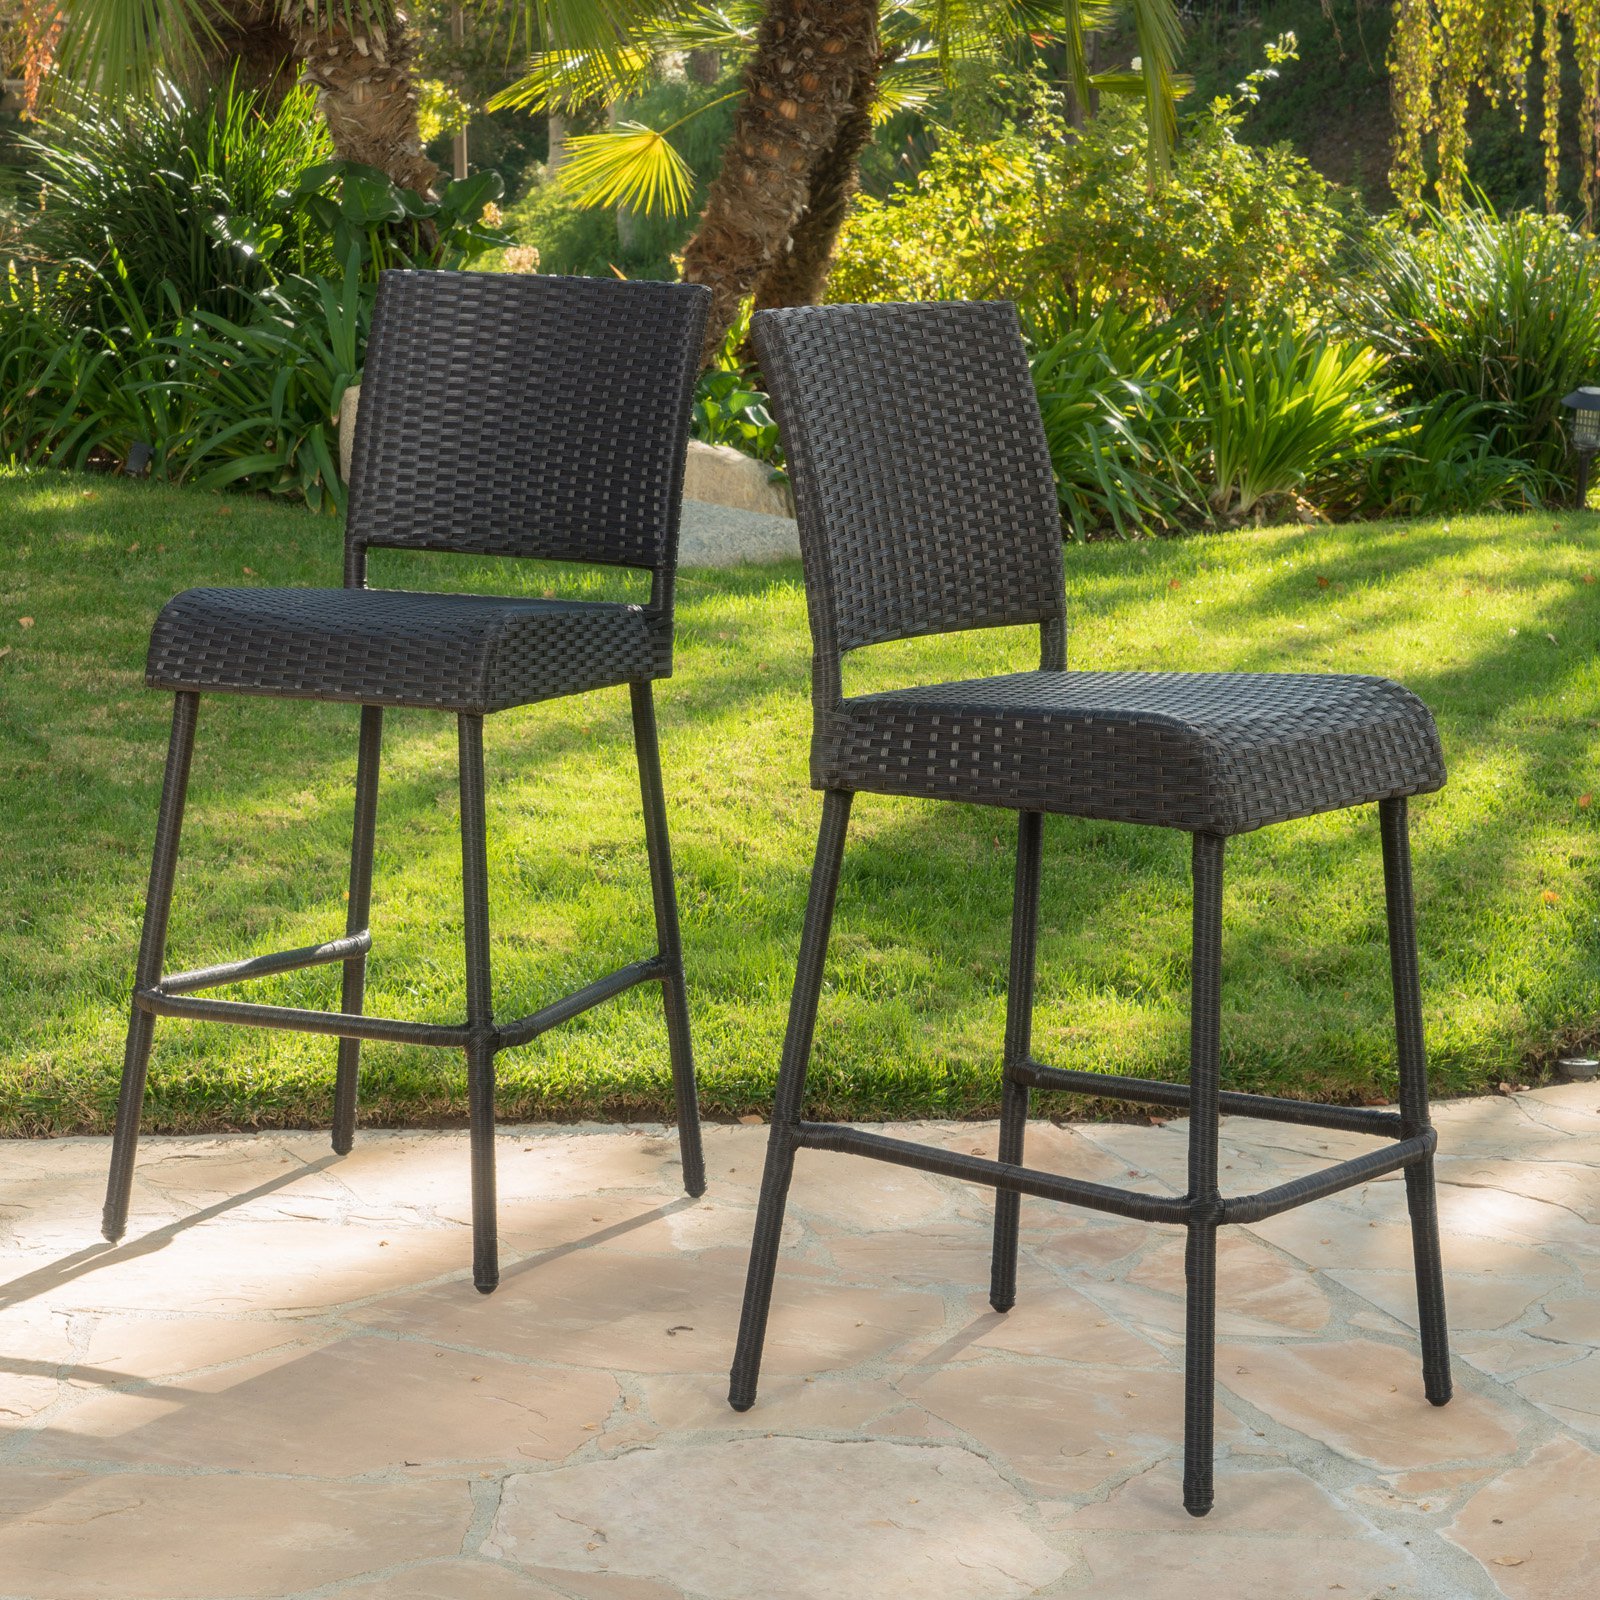 Trestle 29-Inch Outdoors Dark Brown Wicker Barstools (Set of 2) - image 2 of 11